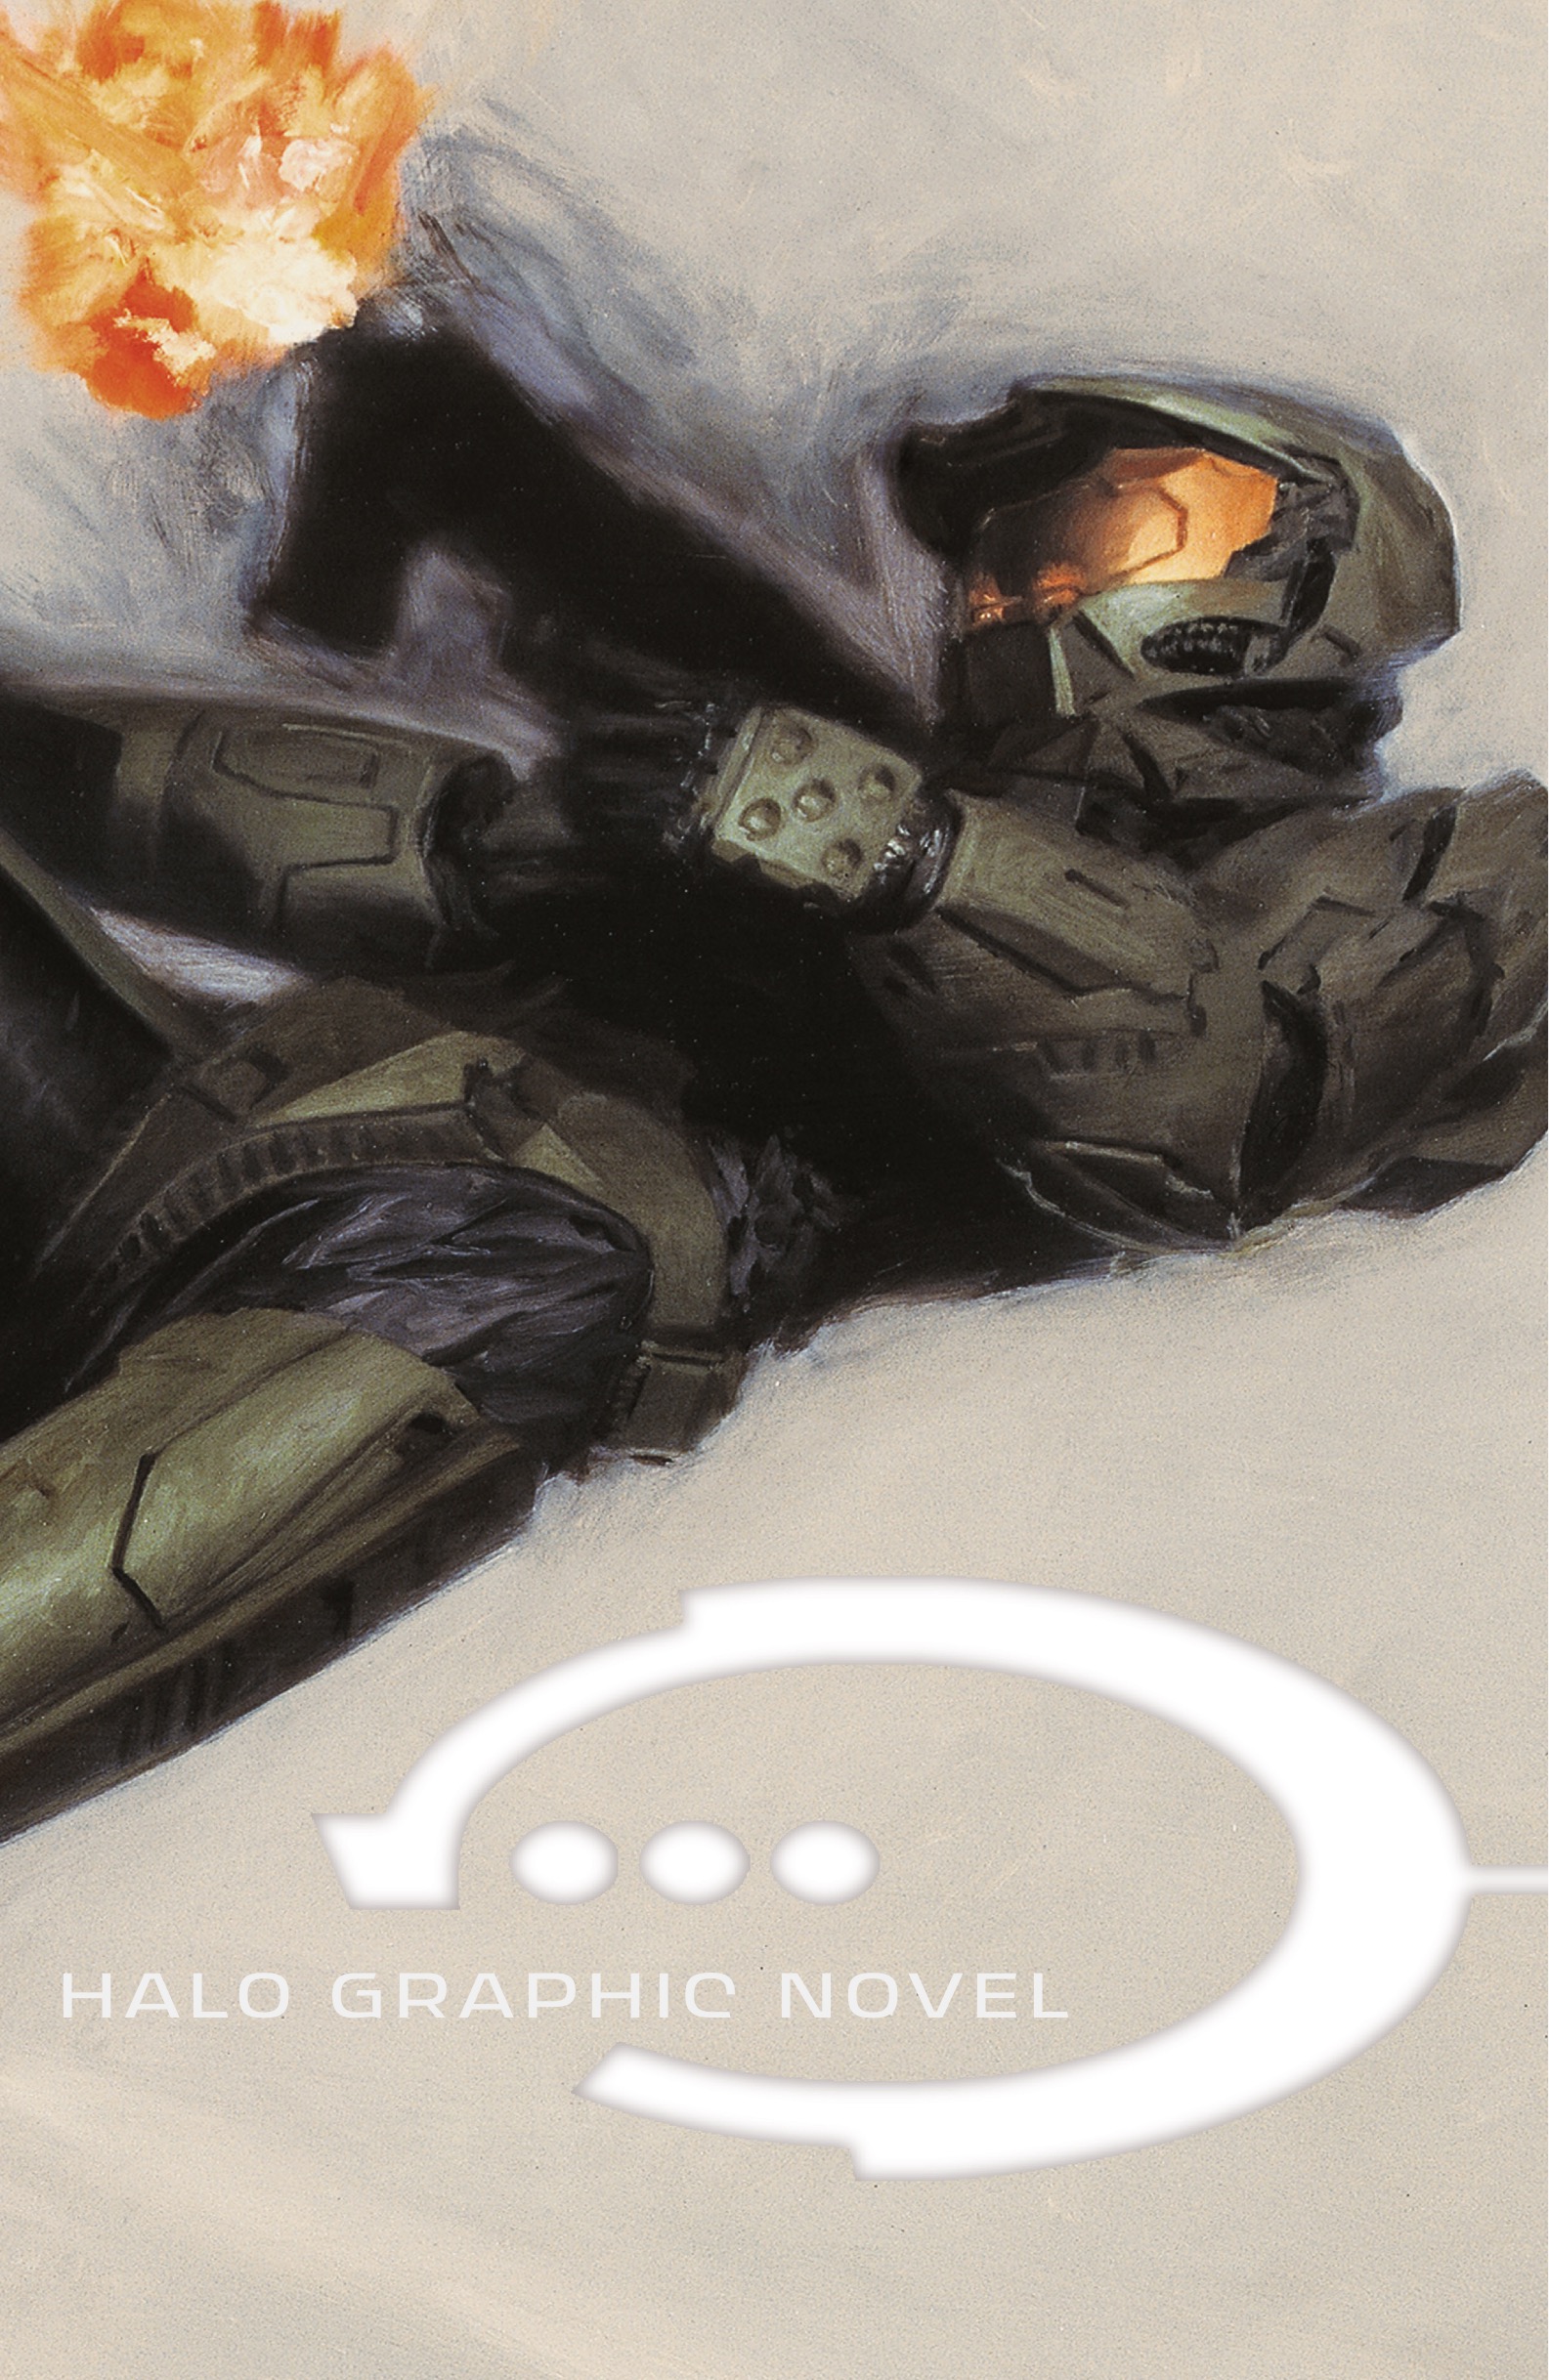 HUMBLE BOOK BUNDLE: HALO GRAPHIC NOVELS BY DARK HORSE